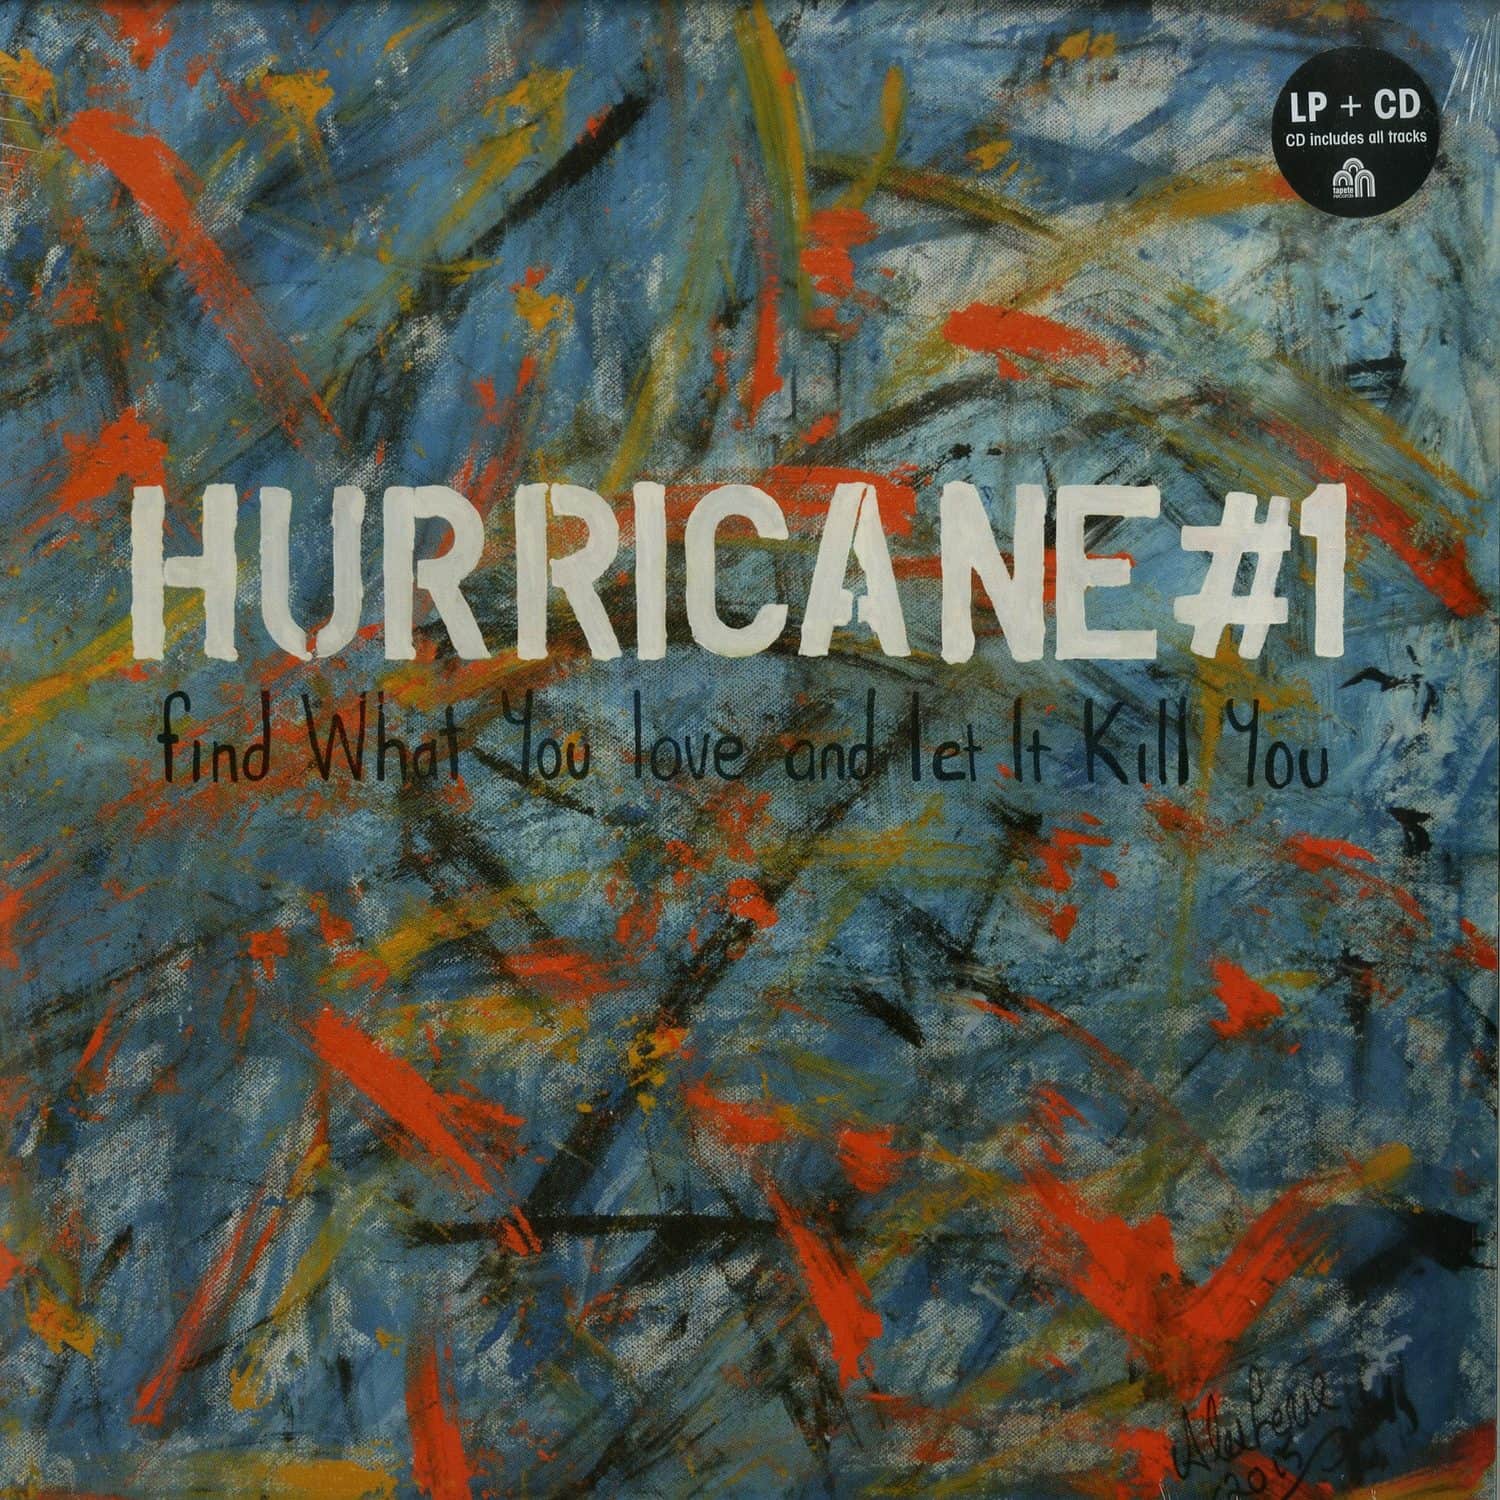 Hurricane#1 - FIND WHAT YOU LOVE AND LET IT KILL YOU 